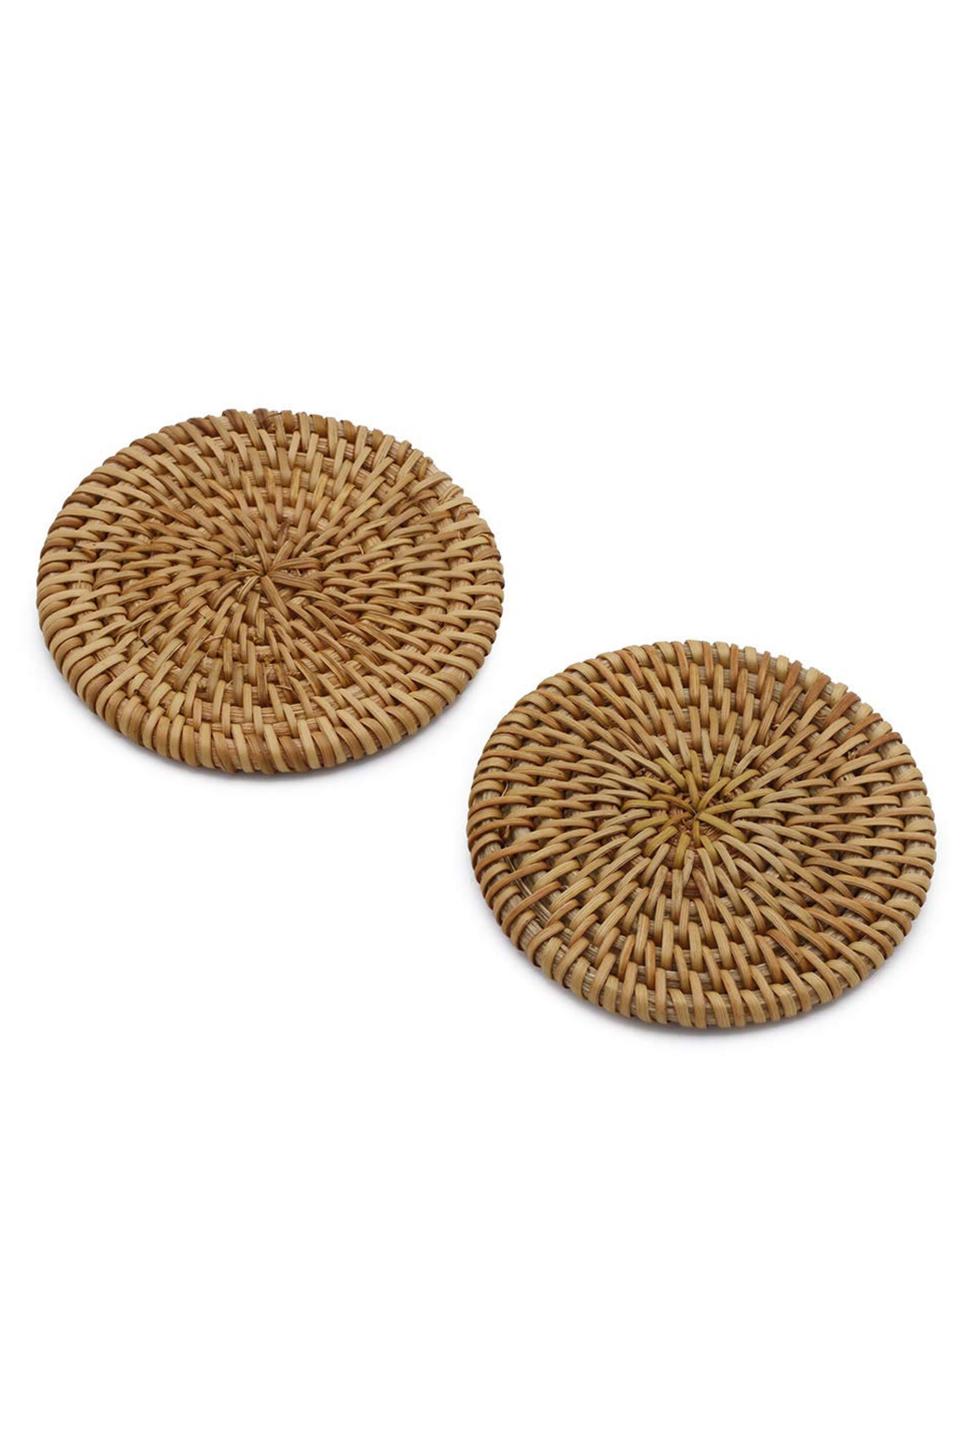 6) BEST RATTAN: Round Cup Rattan Coasters